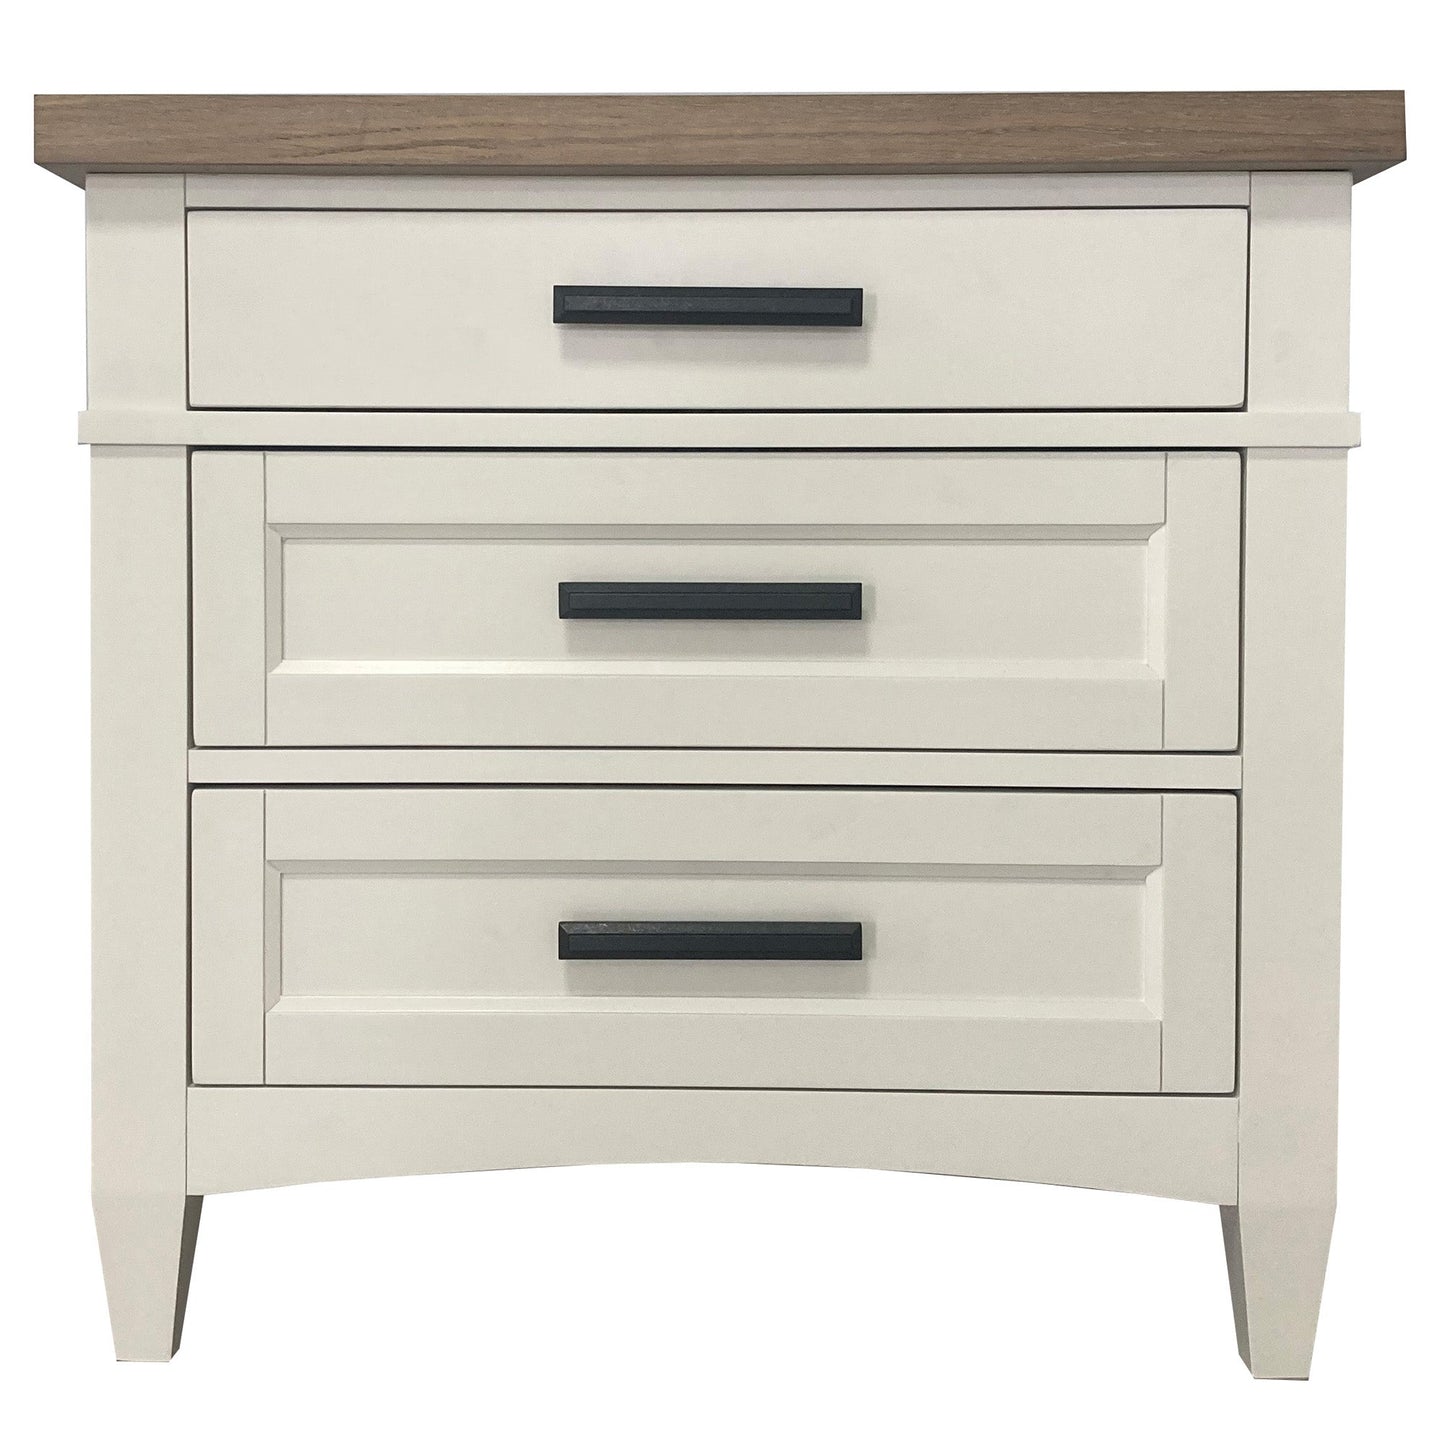 AMERICANA MODERN BEDROOM 3 DRAWER NIGHTSTAND WITH CHARGING STATION